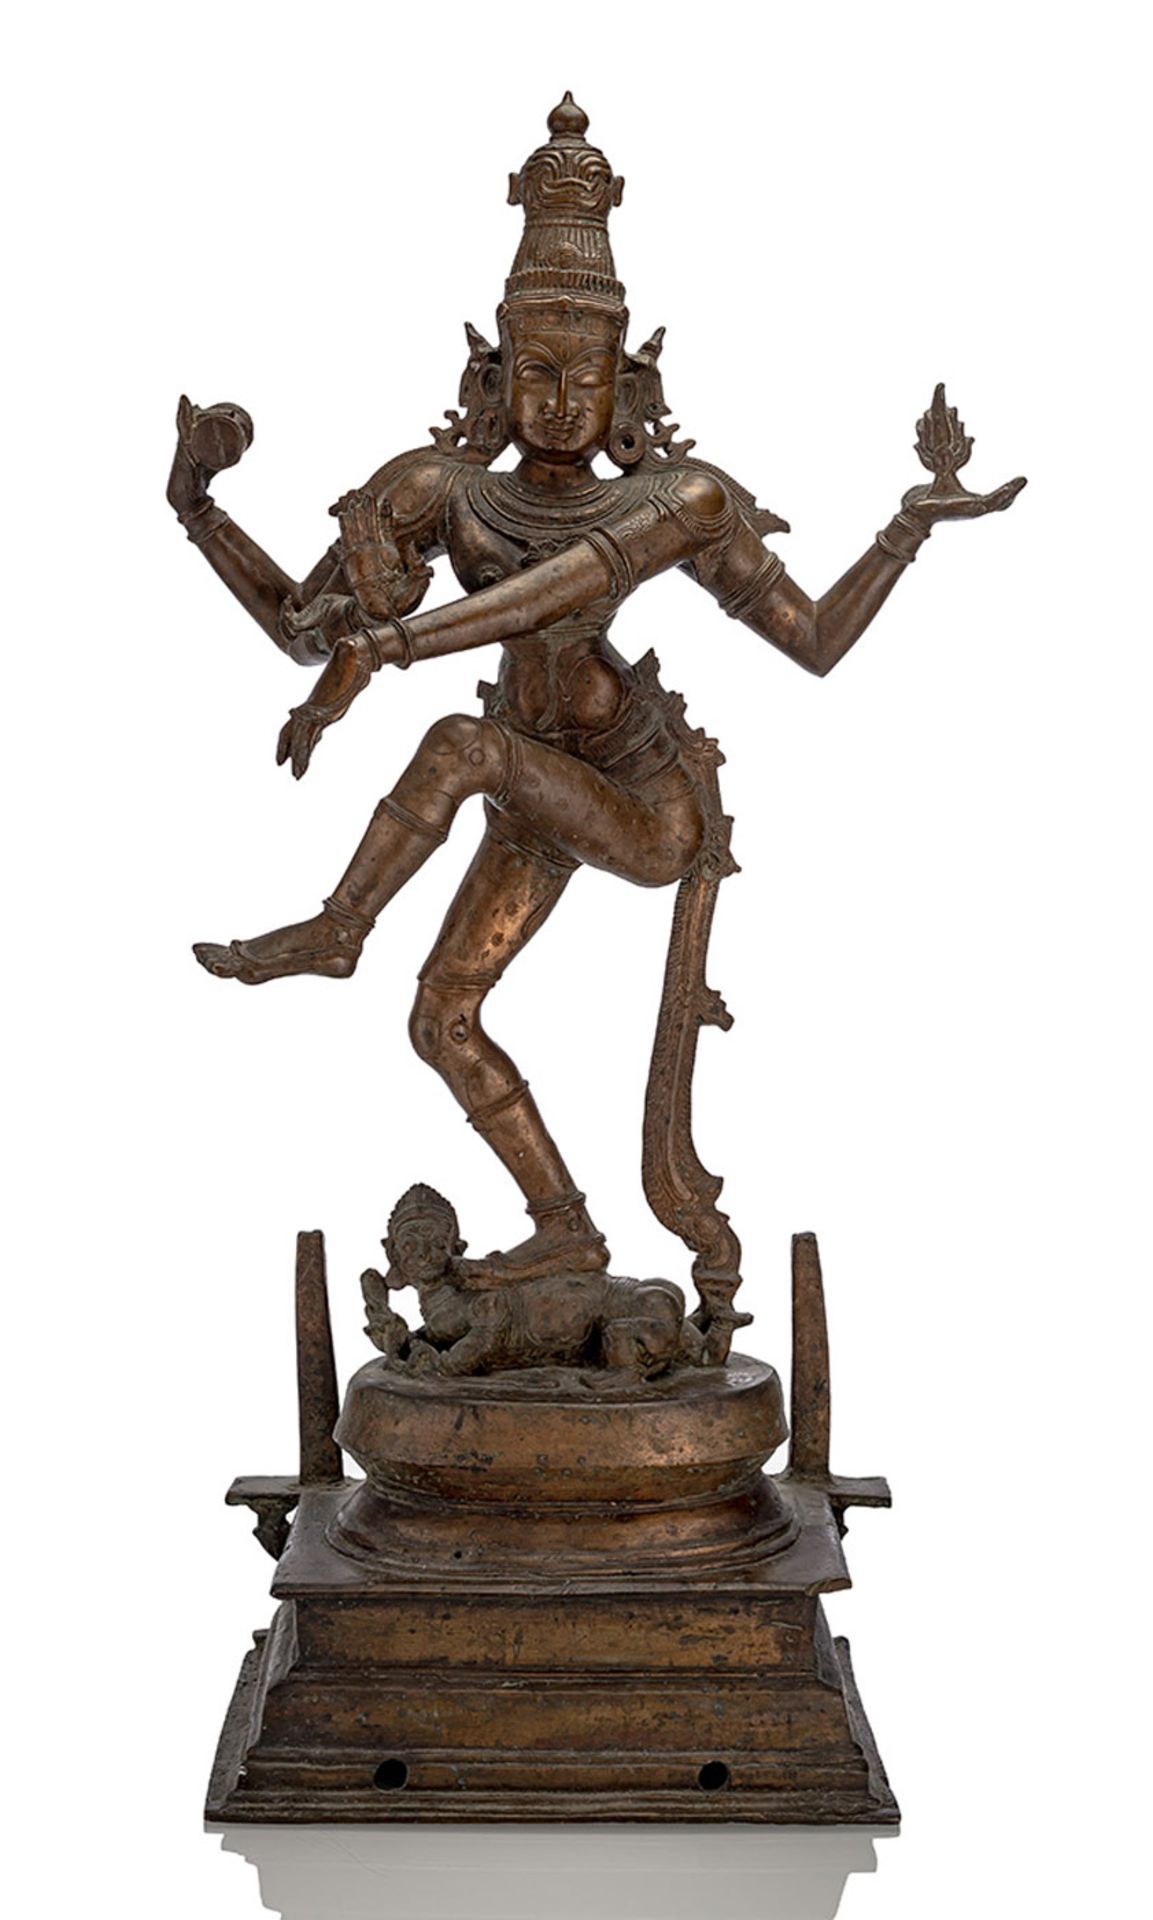 A BRONZE FIGURE OF FOUR-ARMED DANCING SHIVA